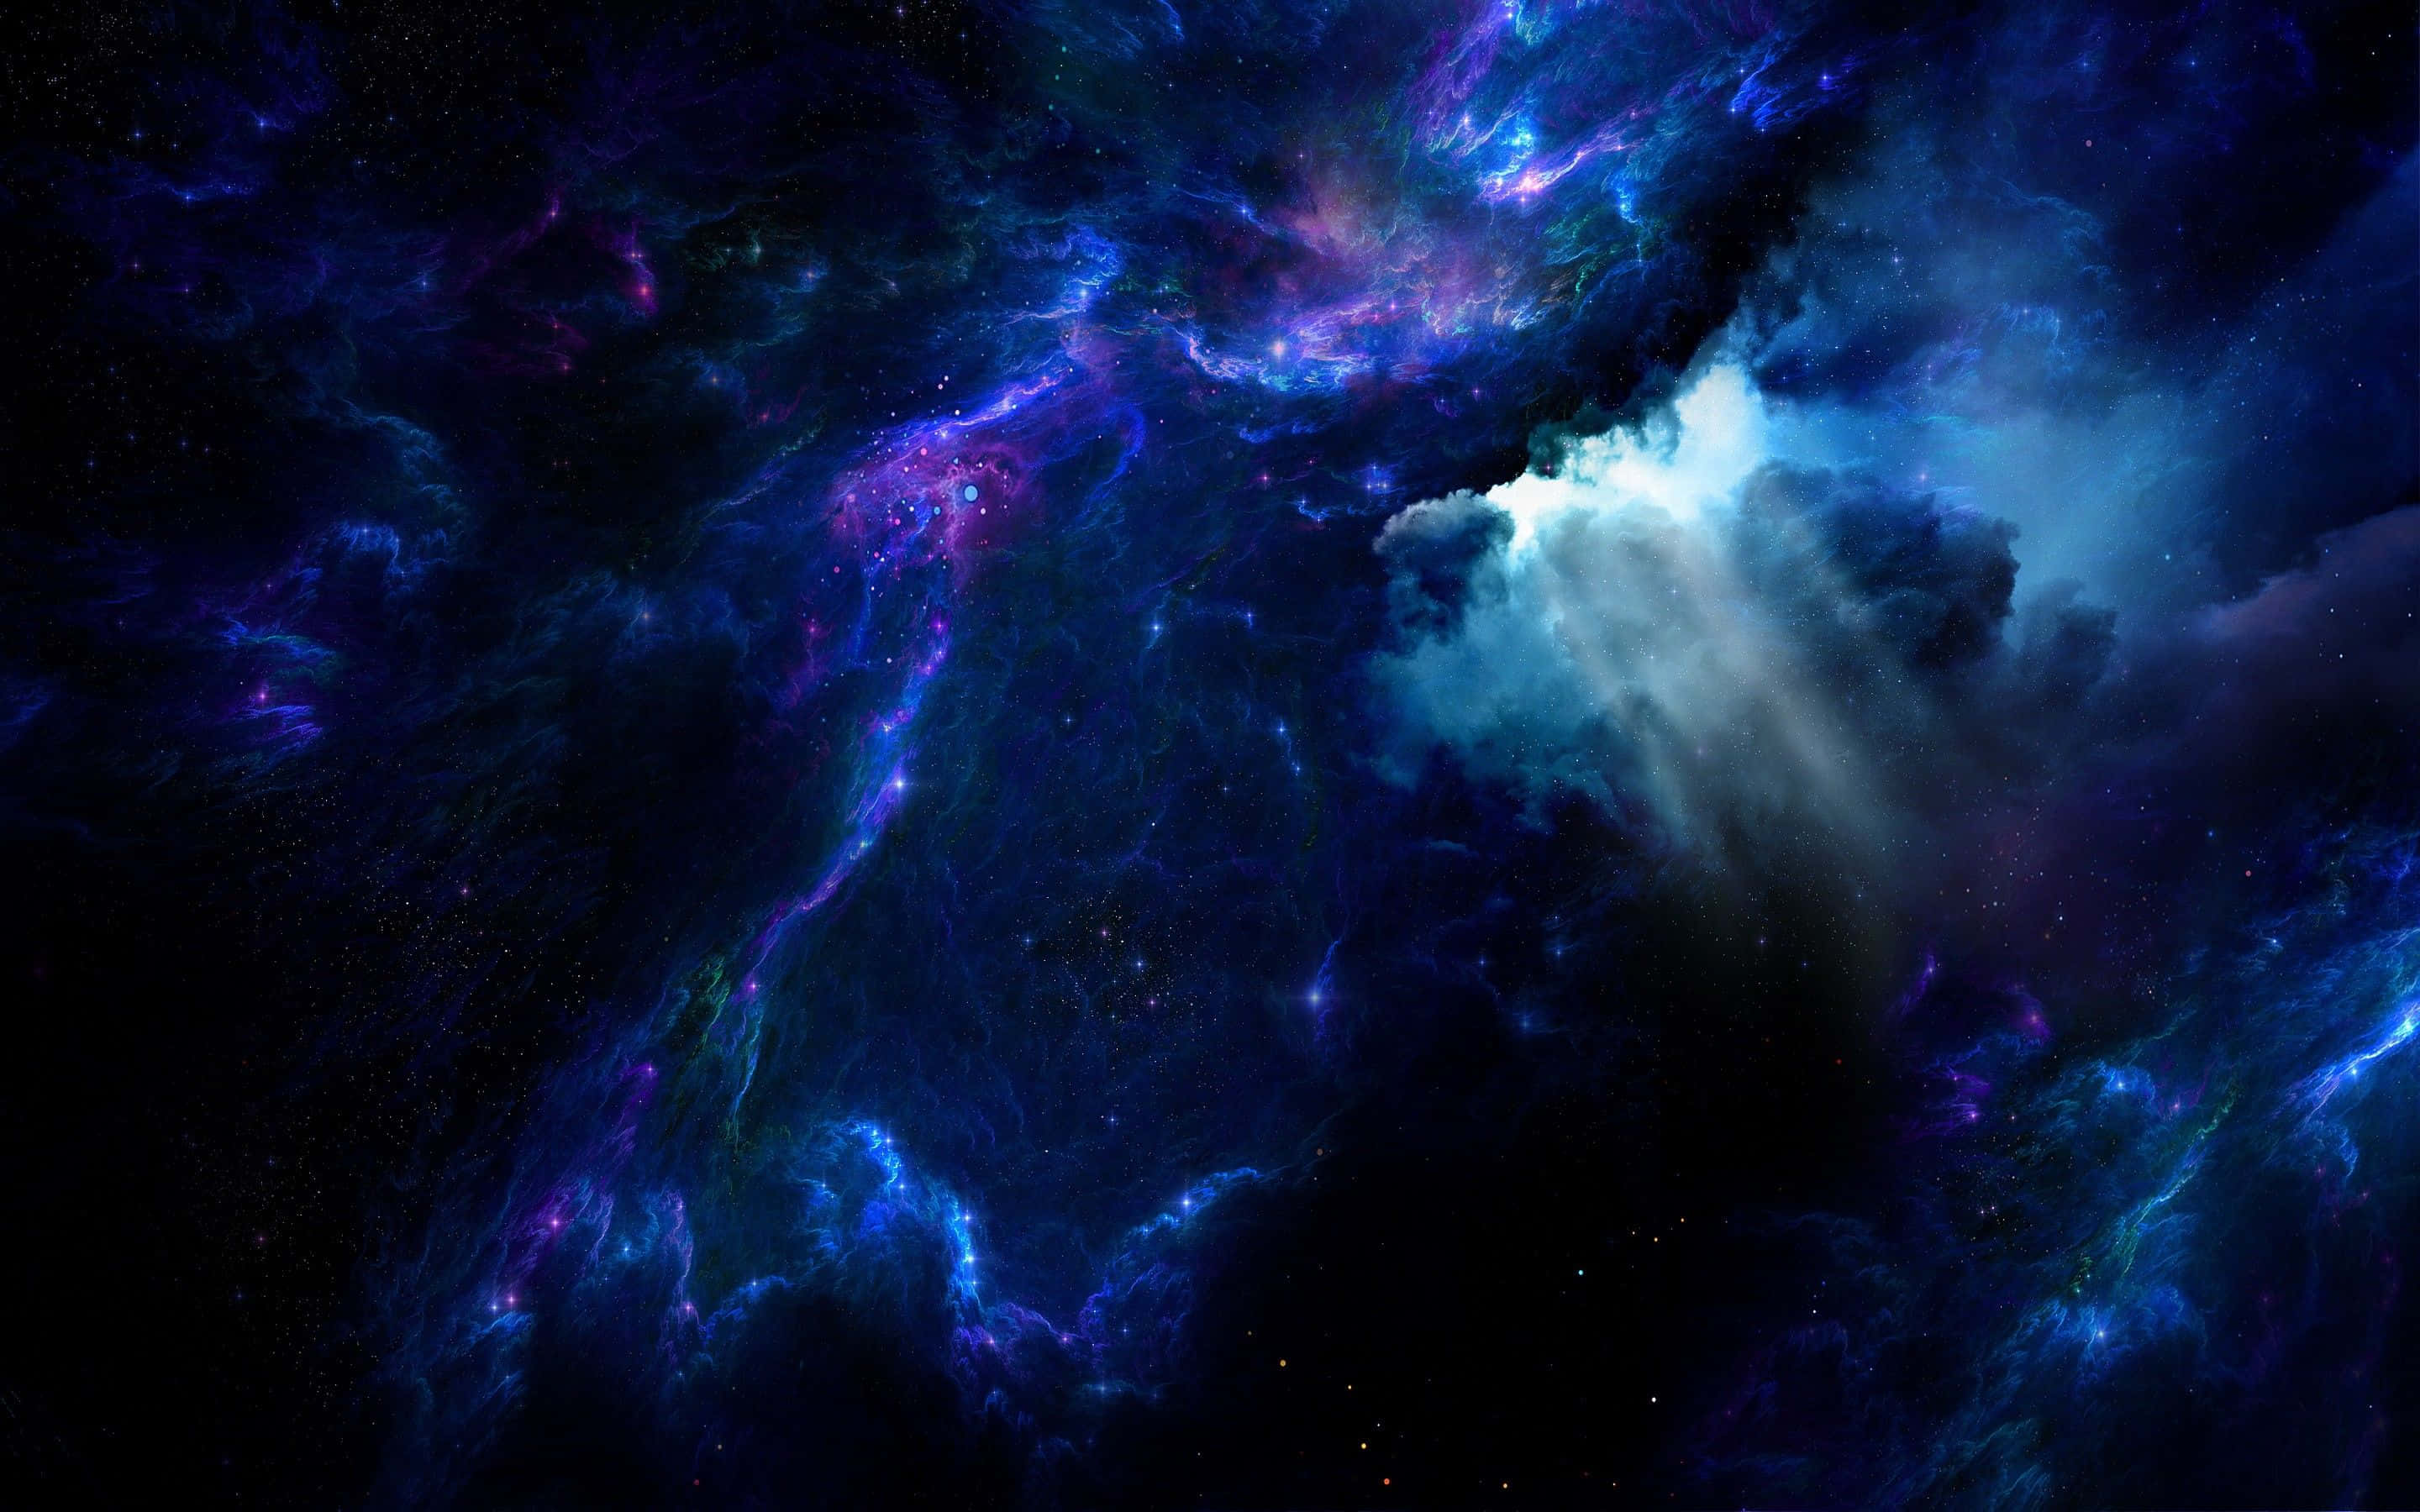 Admire the beauty of outer space